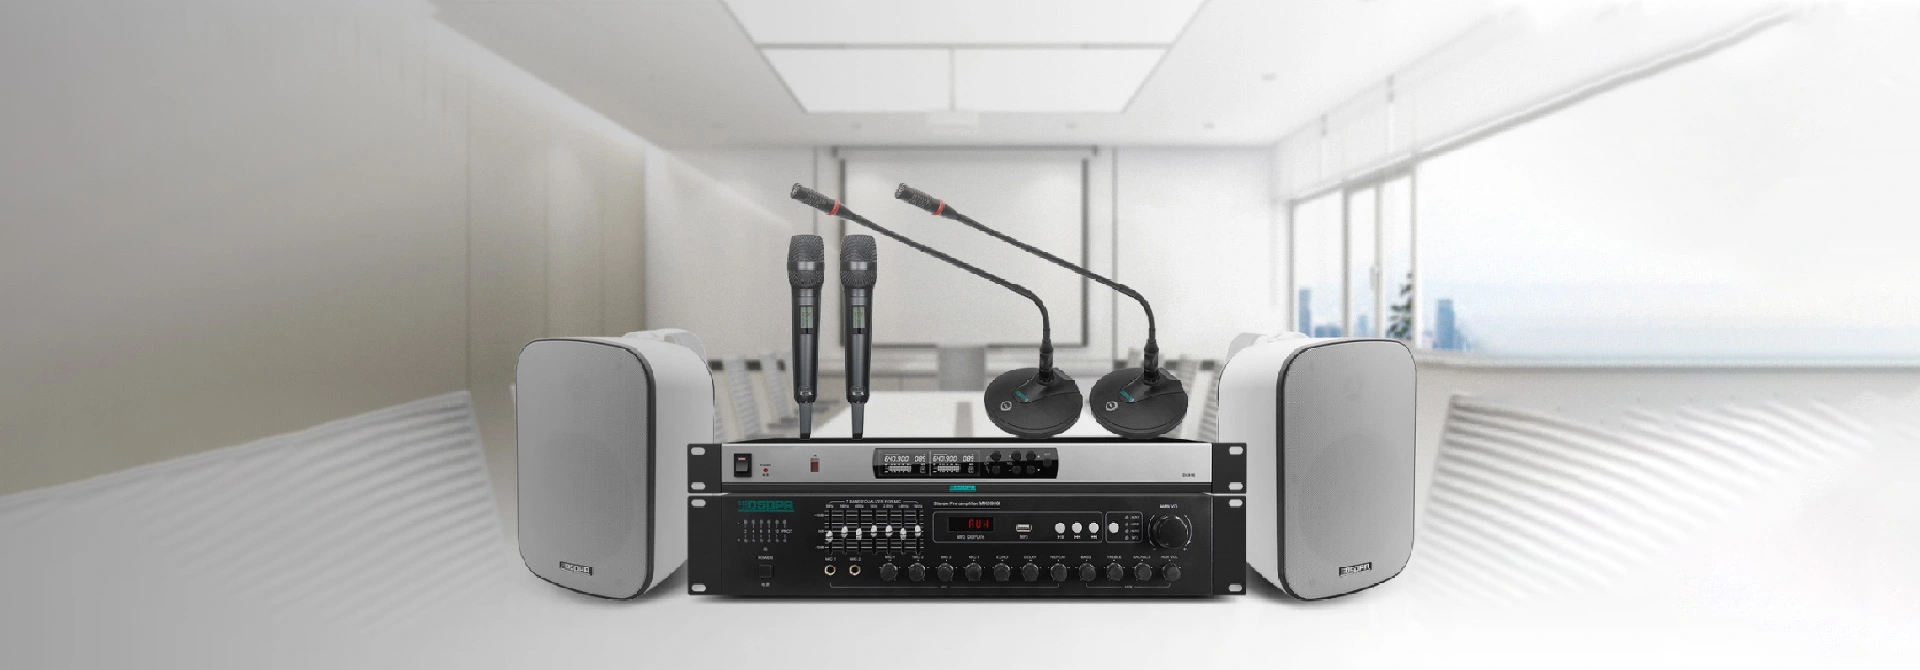 Economic Audio Conference System Solution for Conference Room MK6906 Series